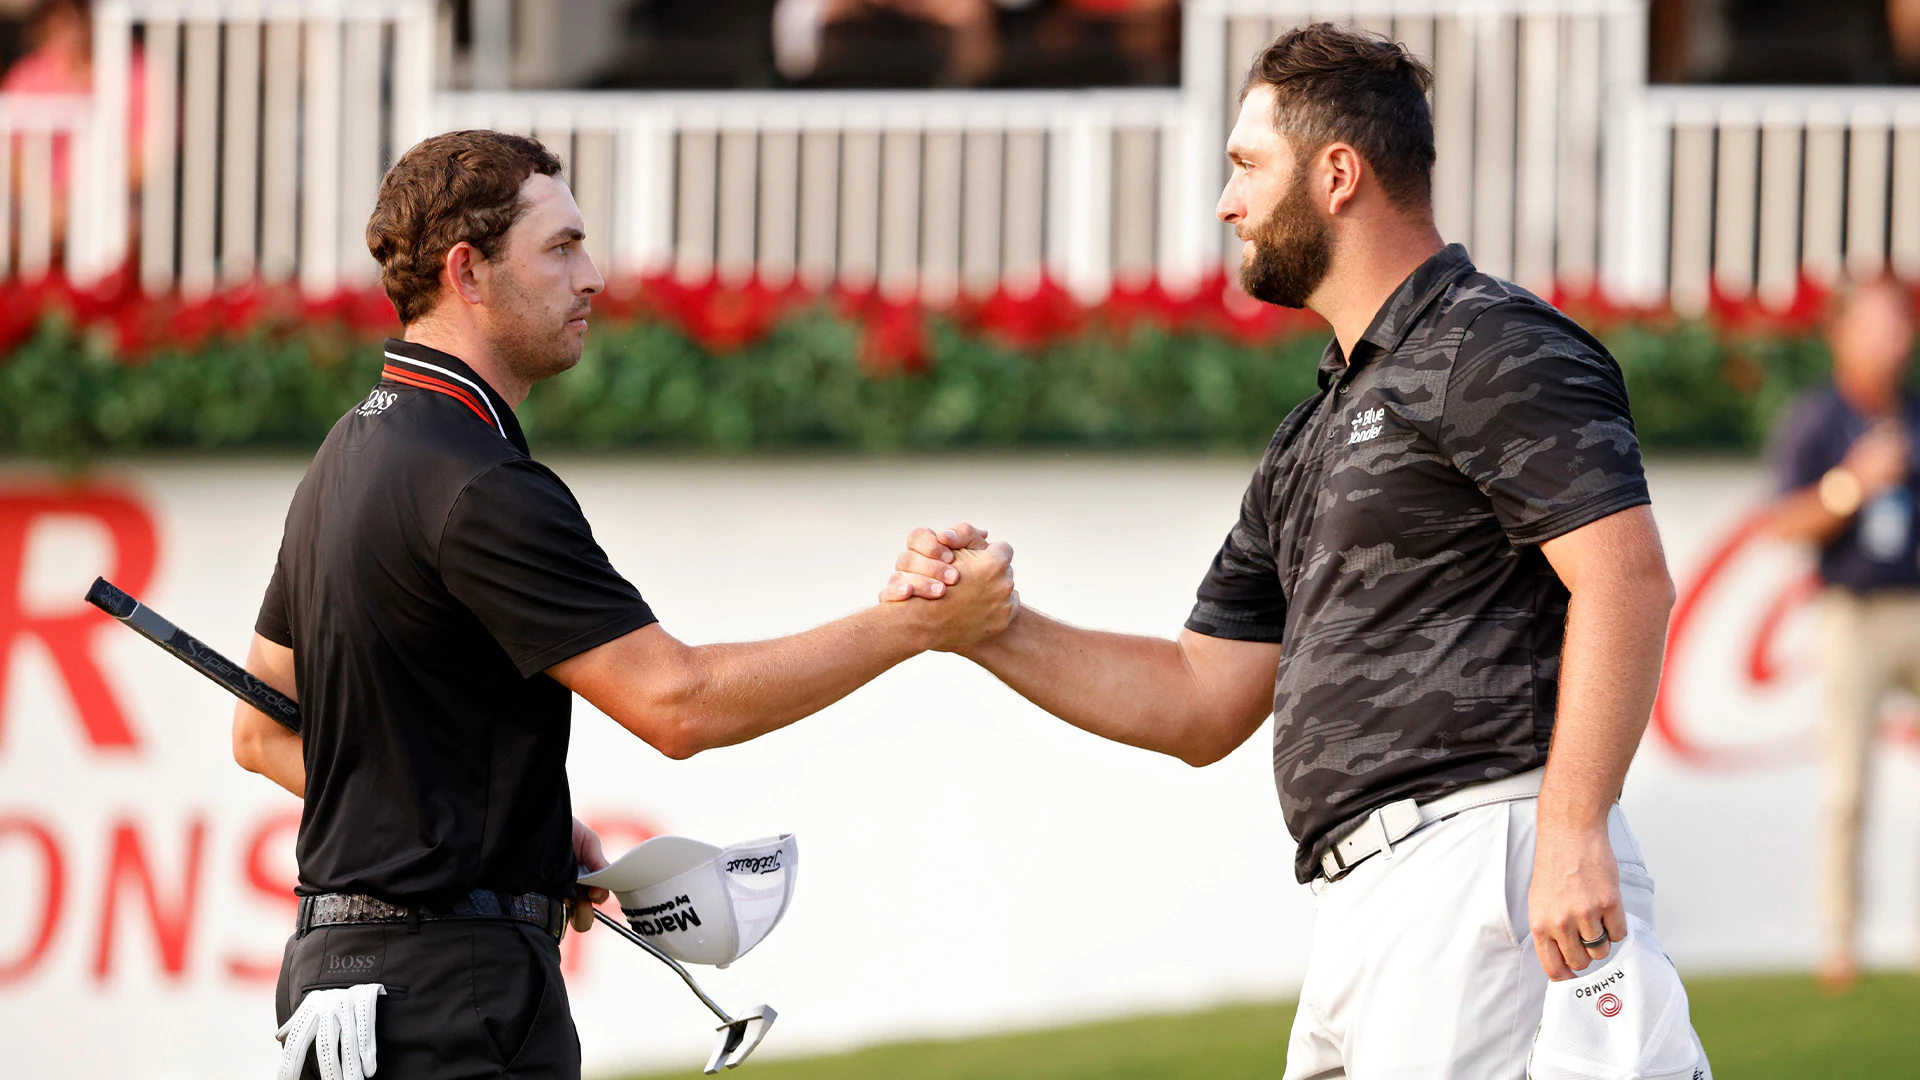 Jon Rahm-Patrick Cantlay is the game’s best legitimate rivalry, not Brooks-Bryson